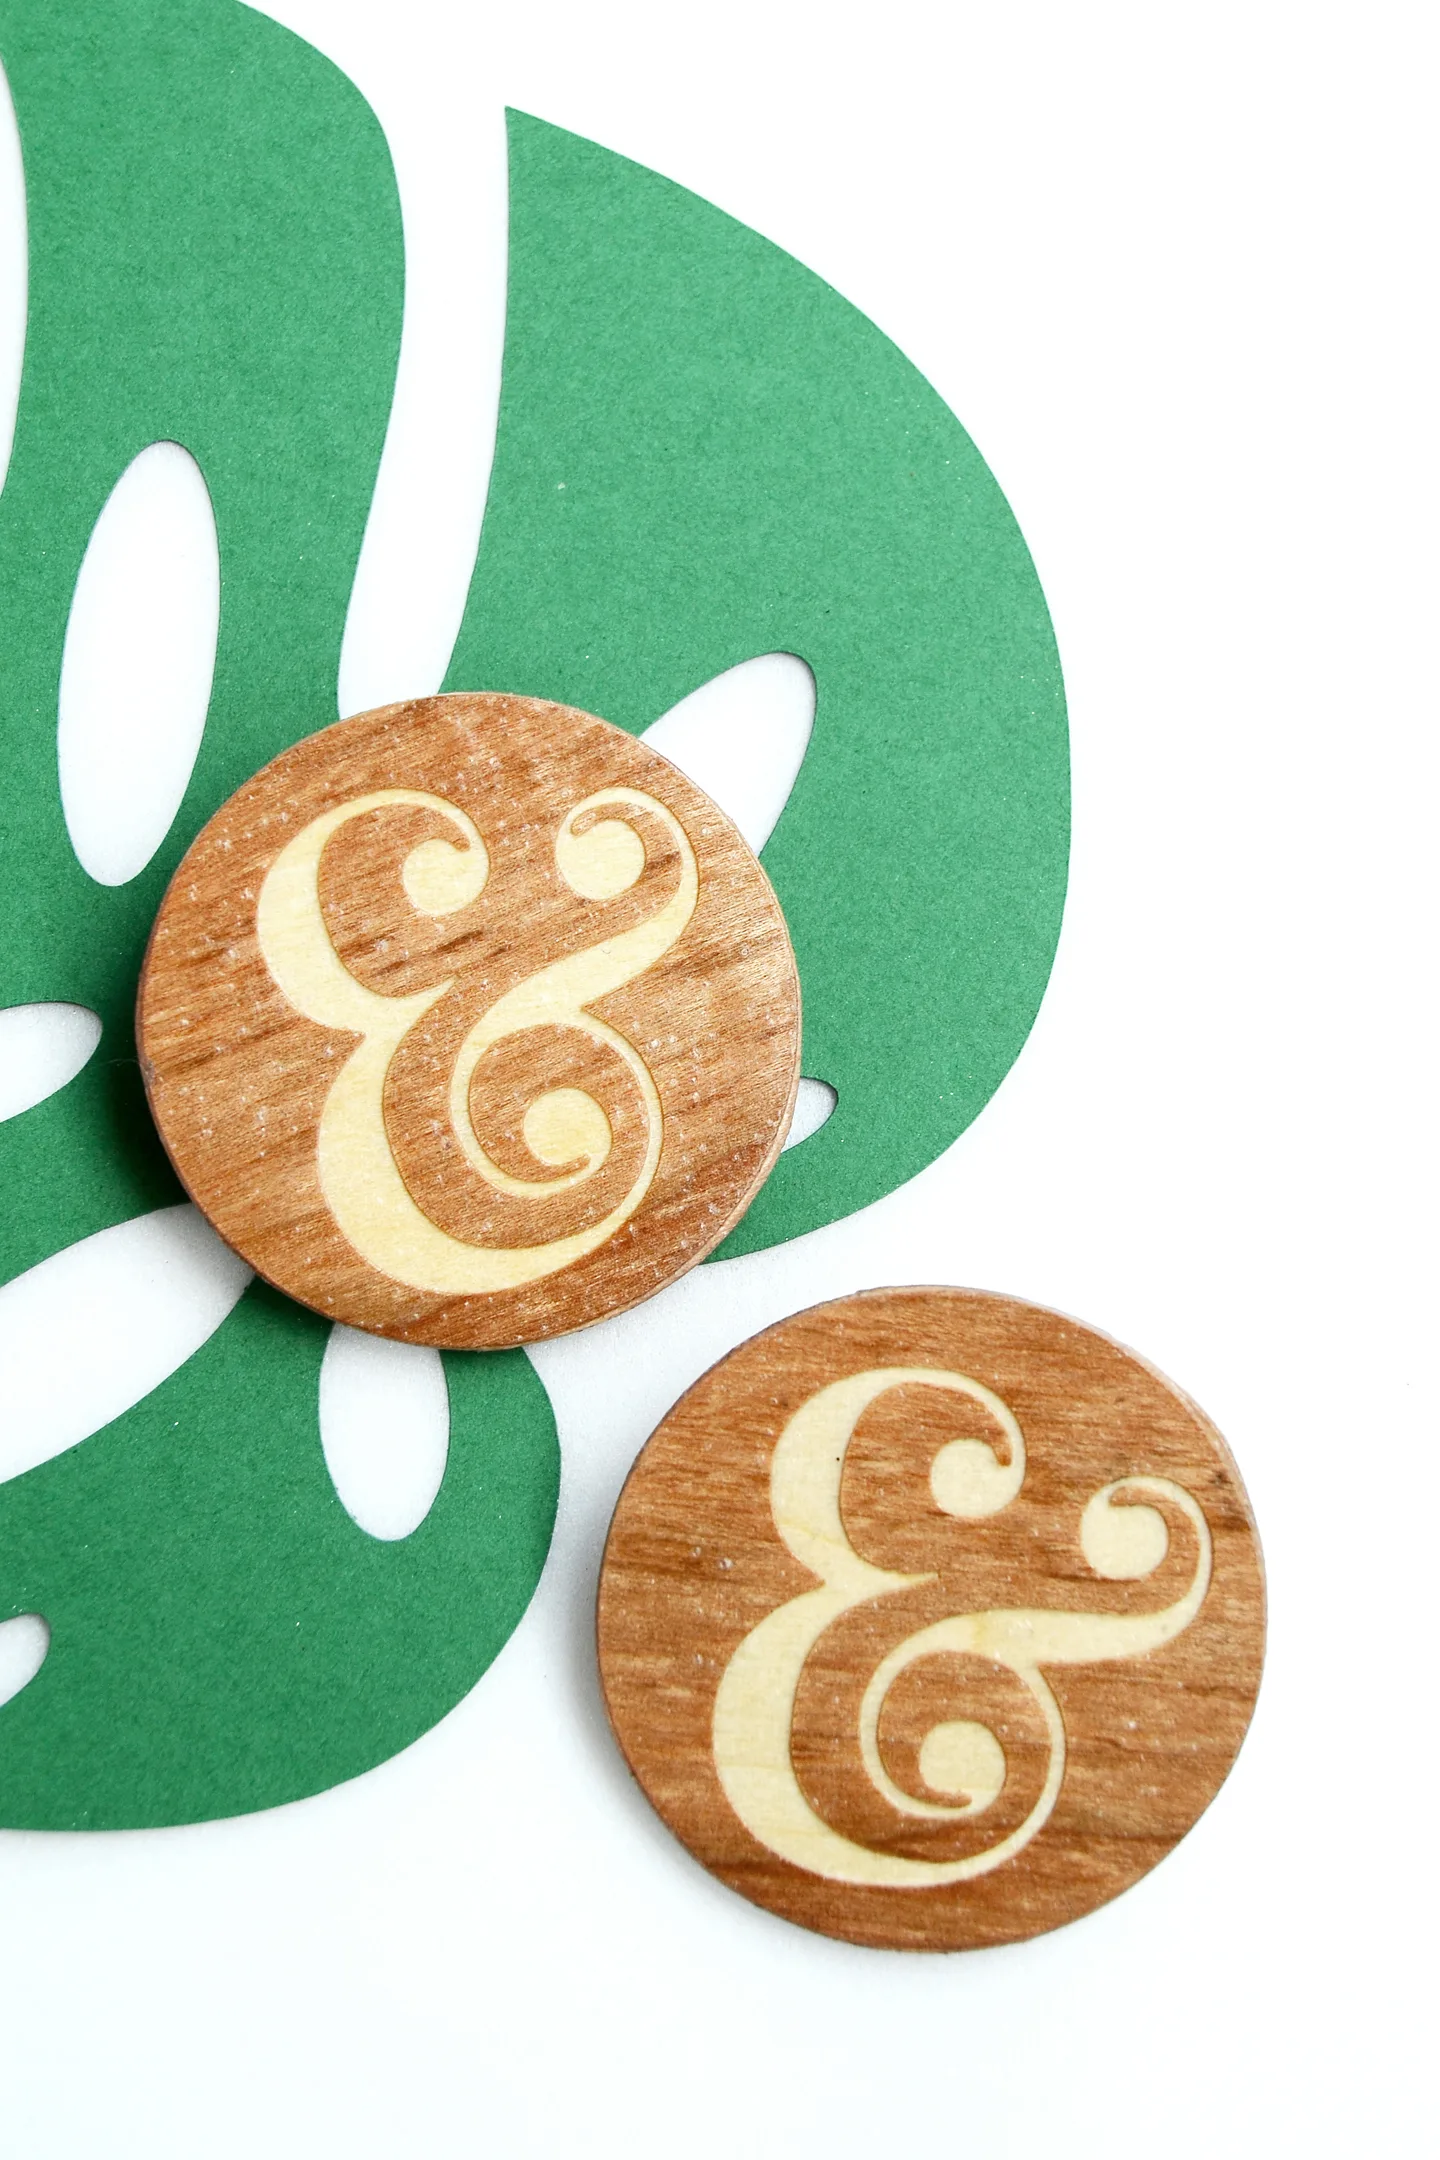 These cool DIY pins feature the almighty ampersand. You're going to love the wood inlay effect - and you can customize any way you like!